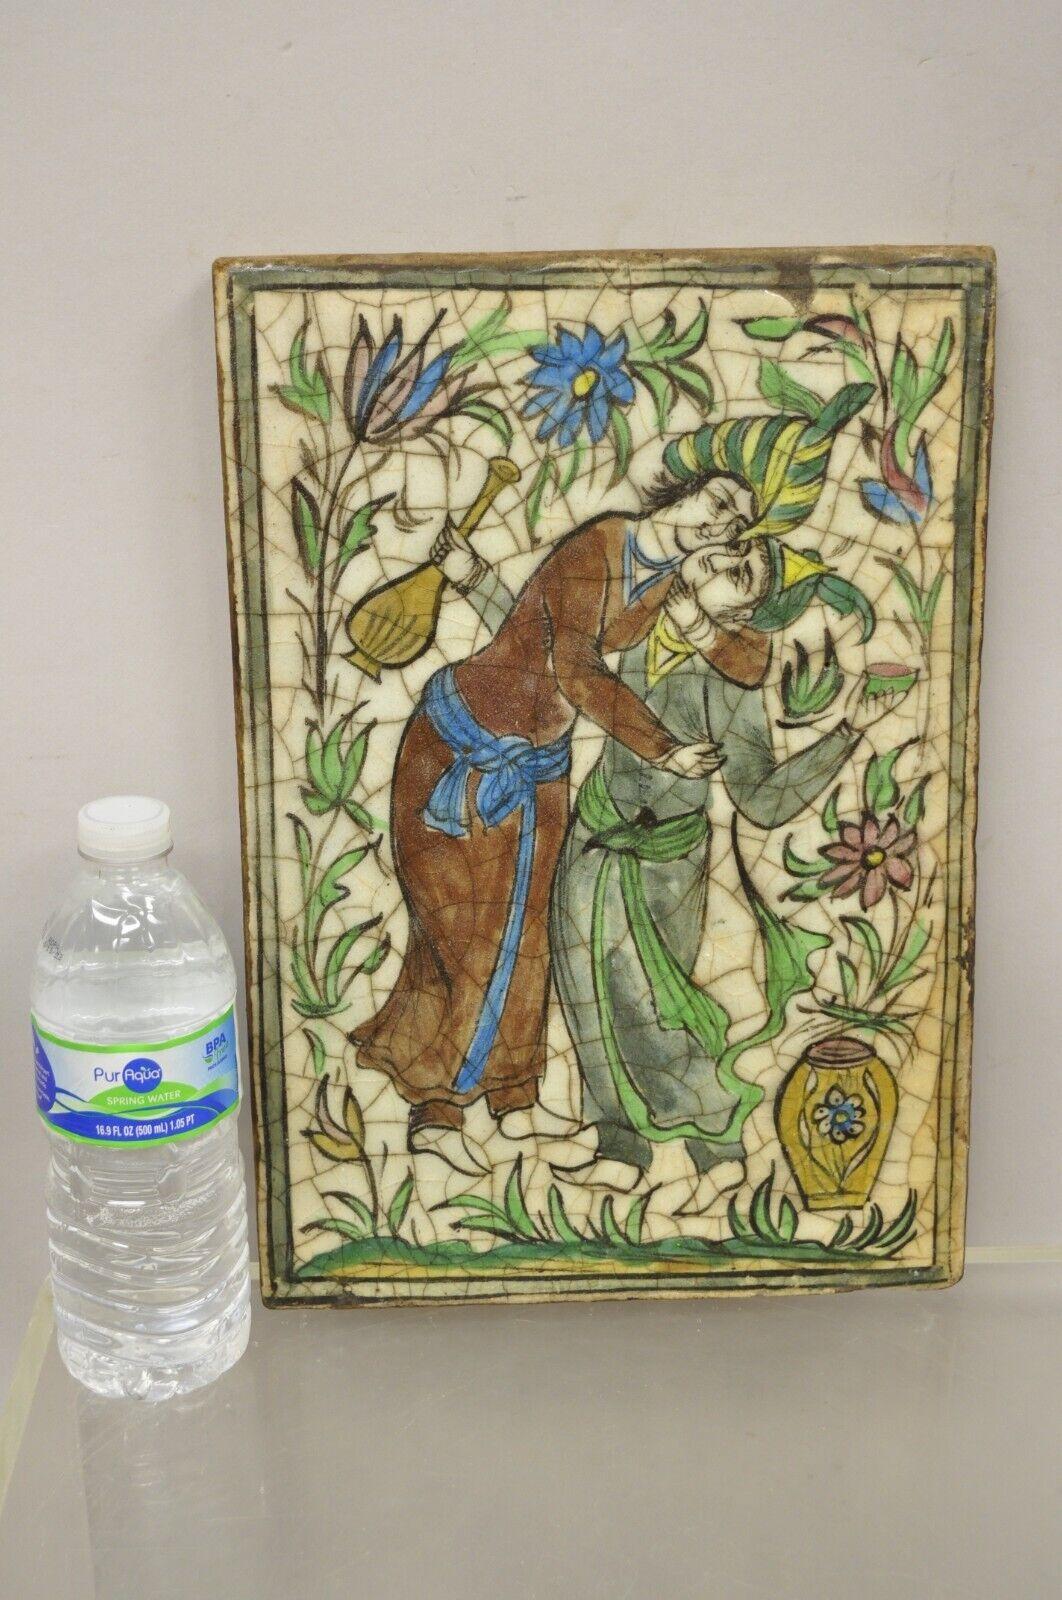 Antique Persian Iznik Qajar style large ceramic pottery tile green couple embrace C1. Original crackle glazed finish, heavy ceramic pottery construction, very impressive detail, wonderful style and form. Great to mount as wall art or accent tiles